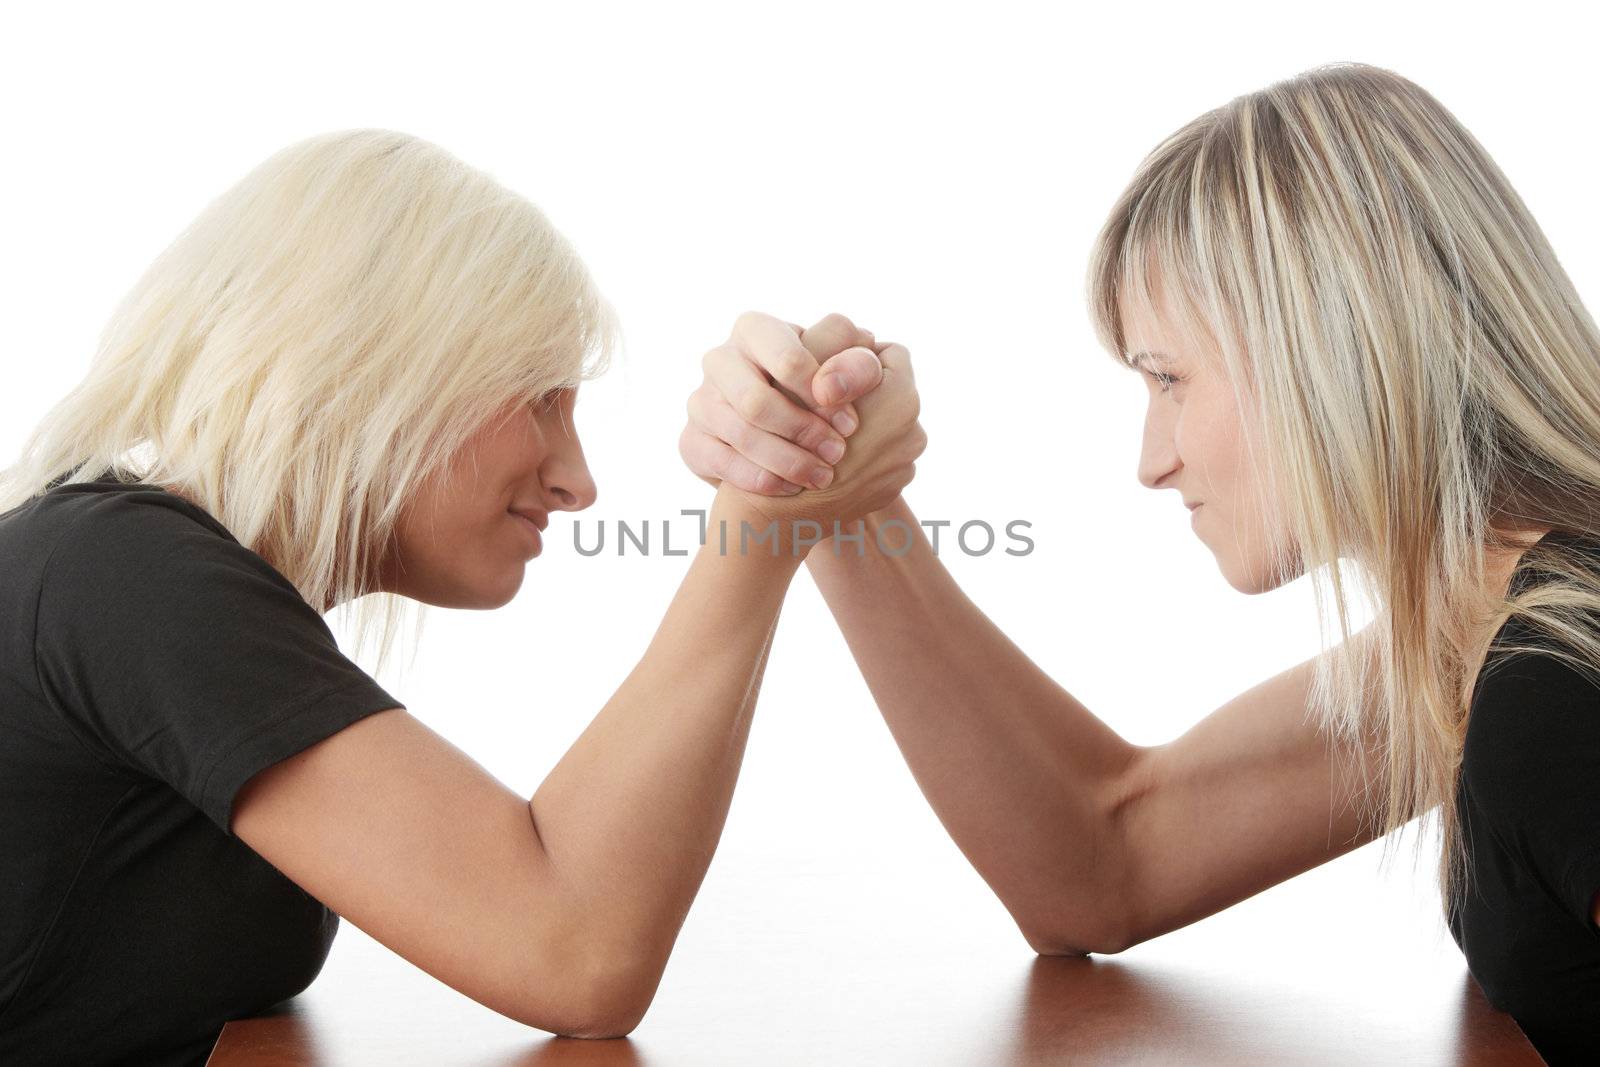 Two woman competition. Isolated on white background